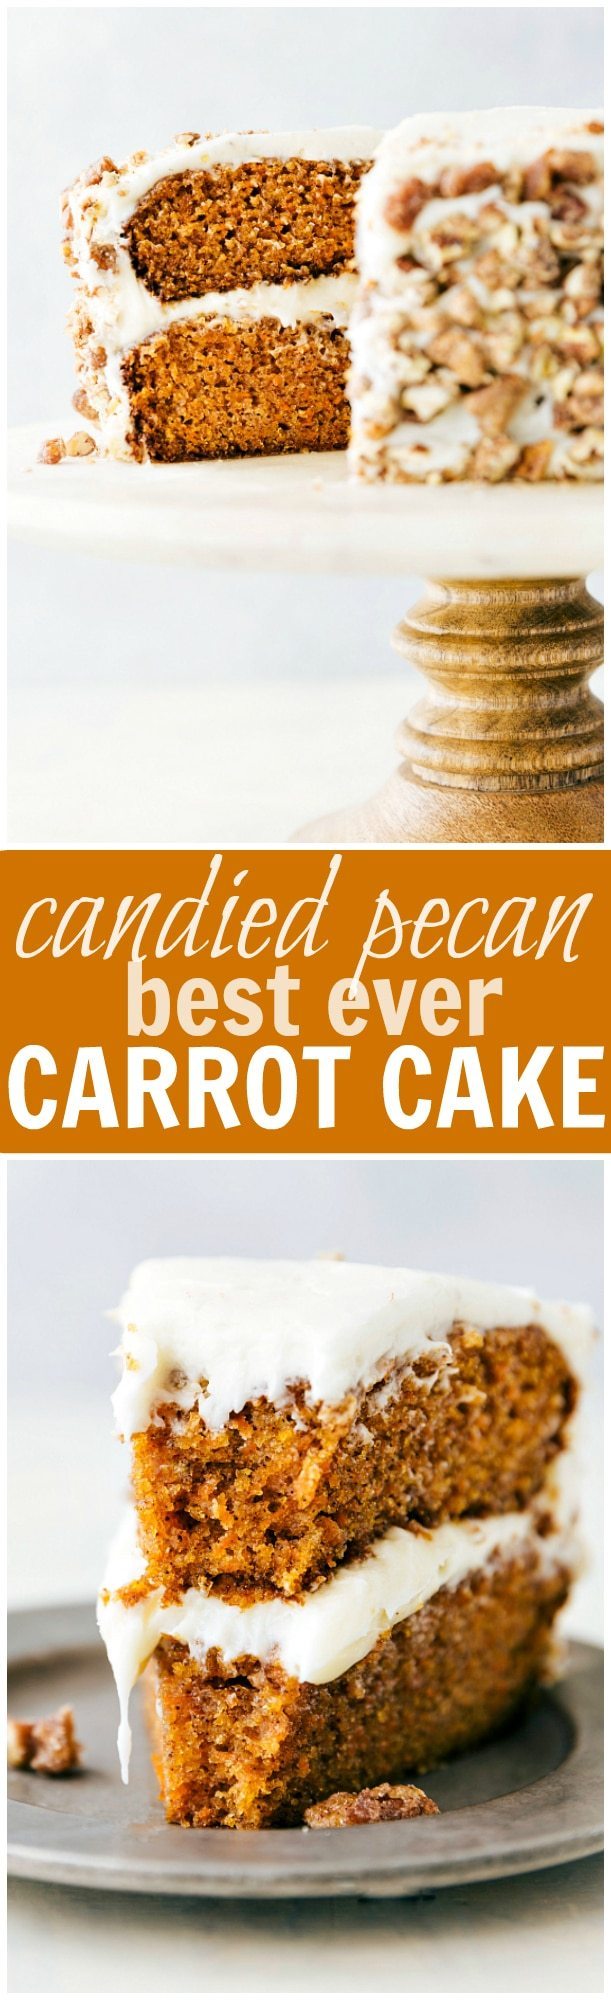 The ULTIMATE BEST EVER carrot cake! Dozens were tested to bring you this amazing recipe! PLUS a fun twist of adding candied pecans to the sides!! via chelseasmessyapron.com